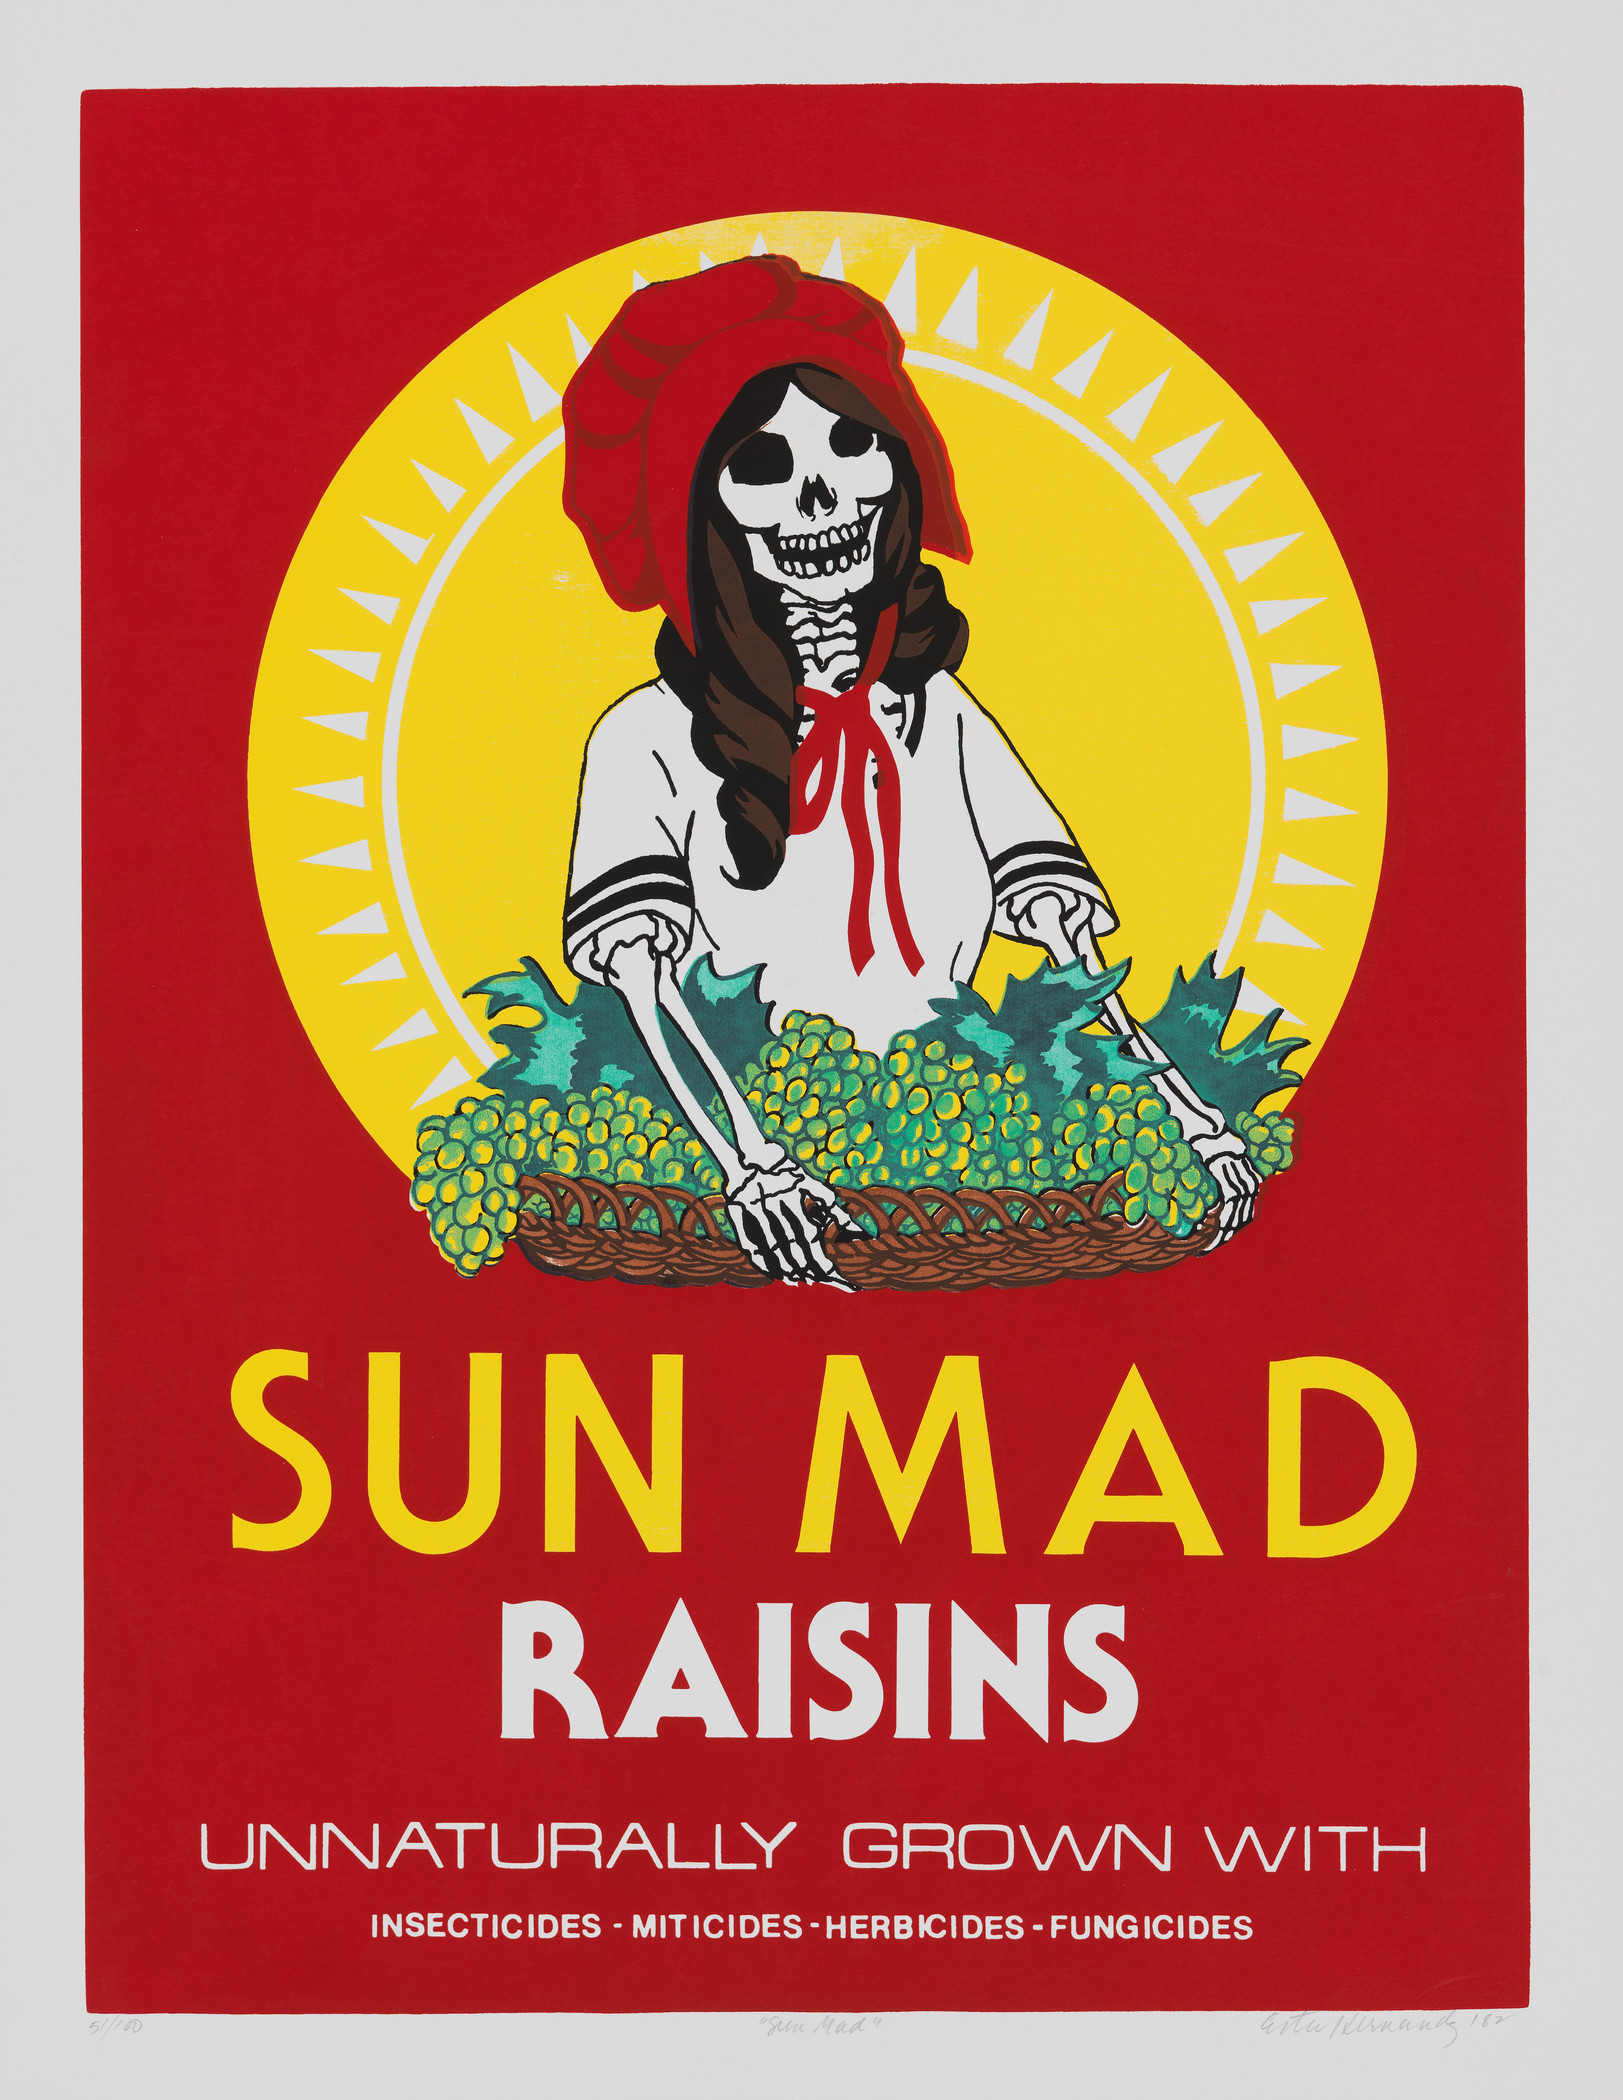 Ester Hernández, Sun Mad, 1982, Los Angeles County Museum of Art, gift of Kelly and Steve McLeod through the 2019 Decorative Arts and Design Acquisitions Committee (DA²), photo © Museum Associates/LACMA